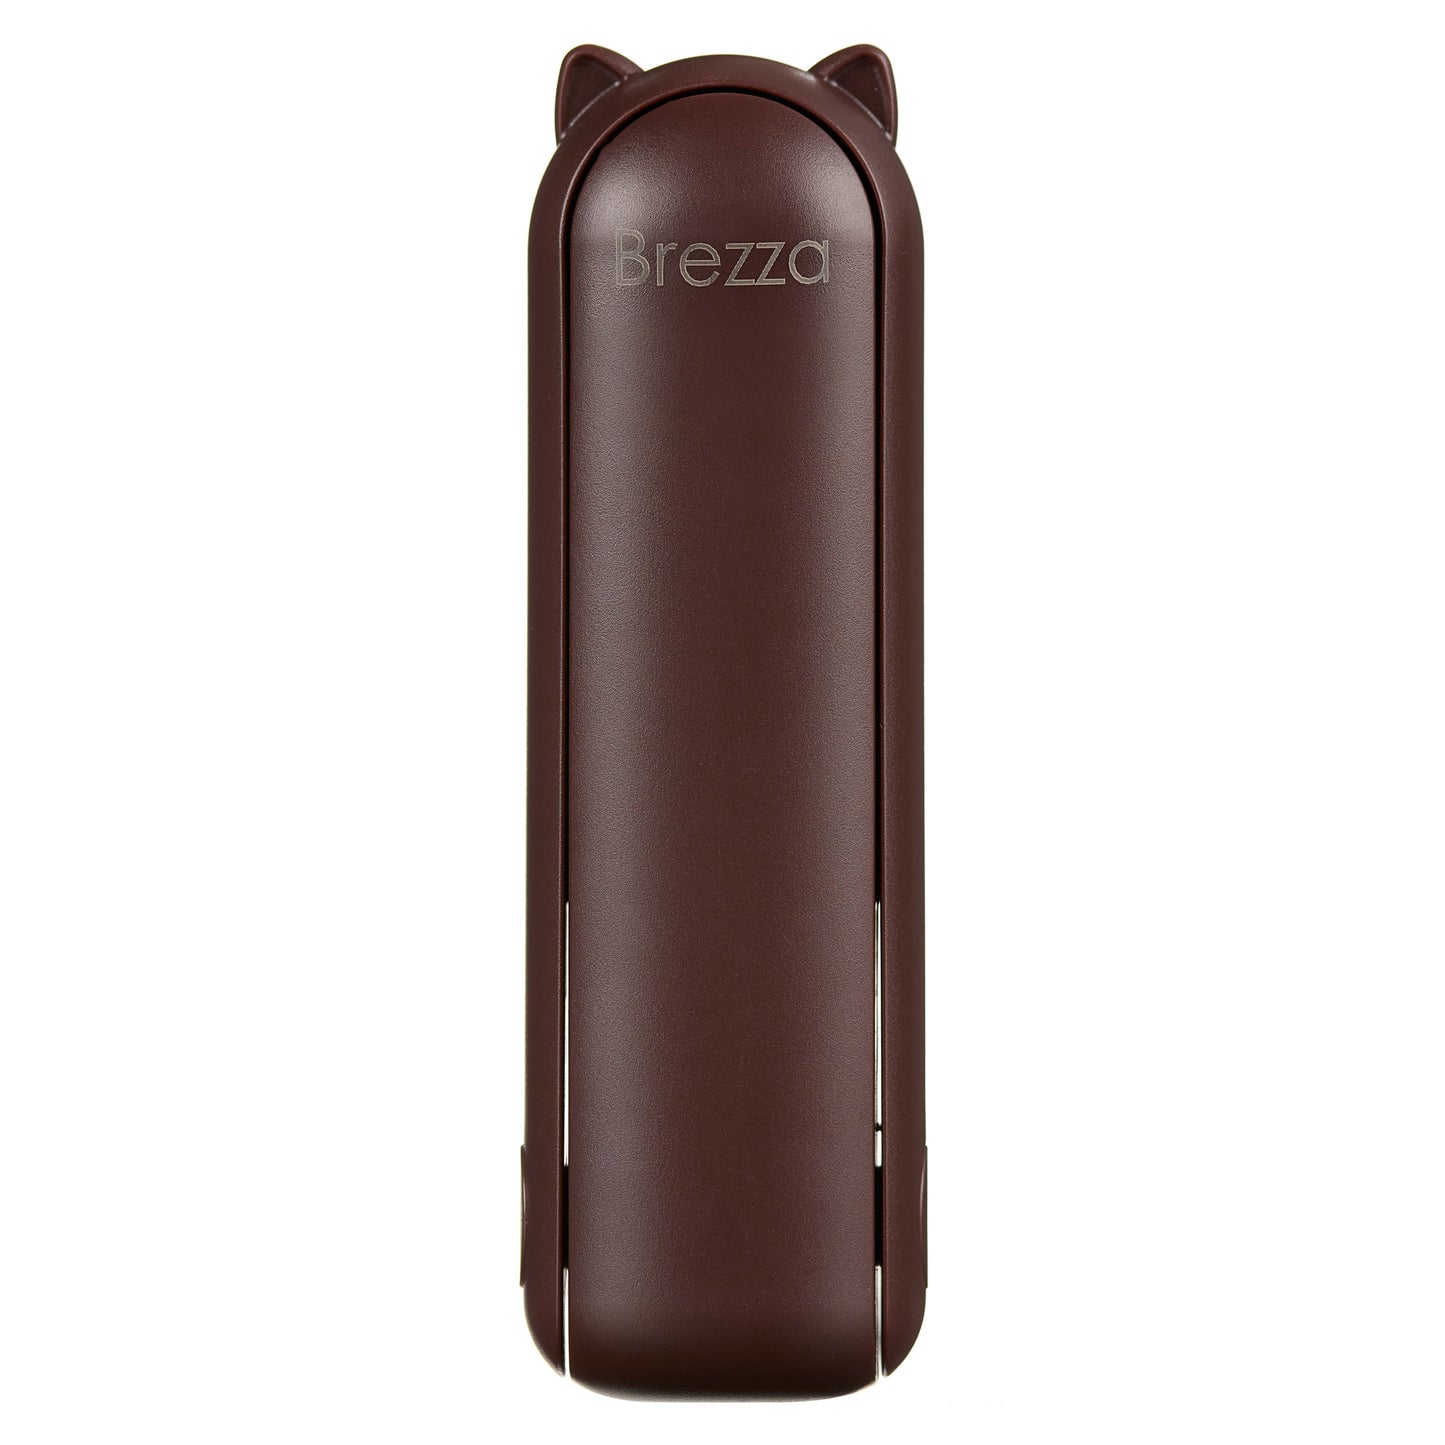 The Baby Brezza - Deep Brown